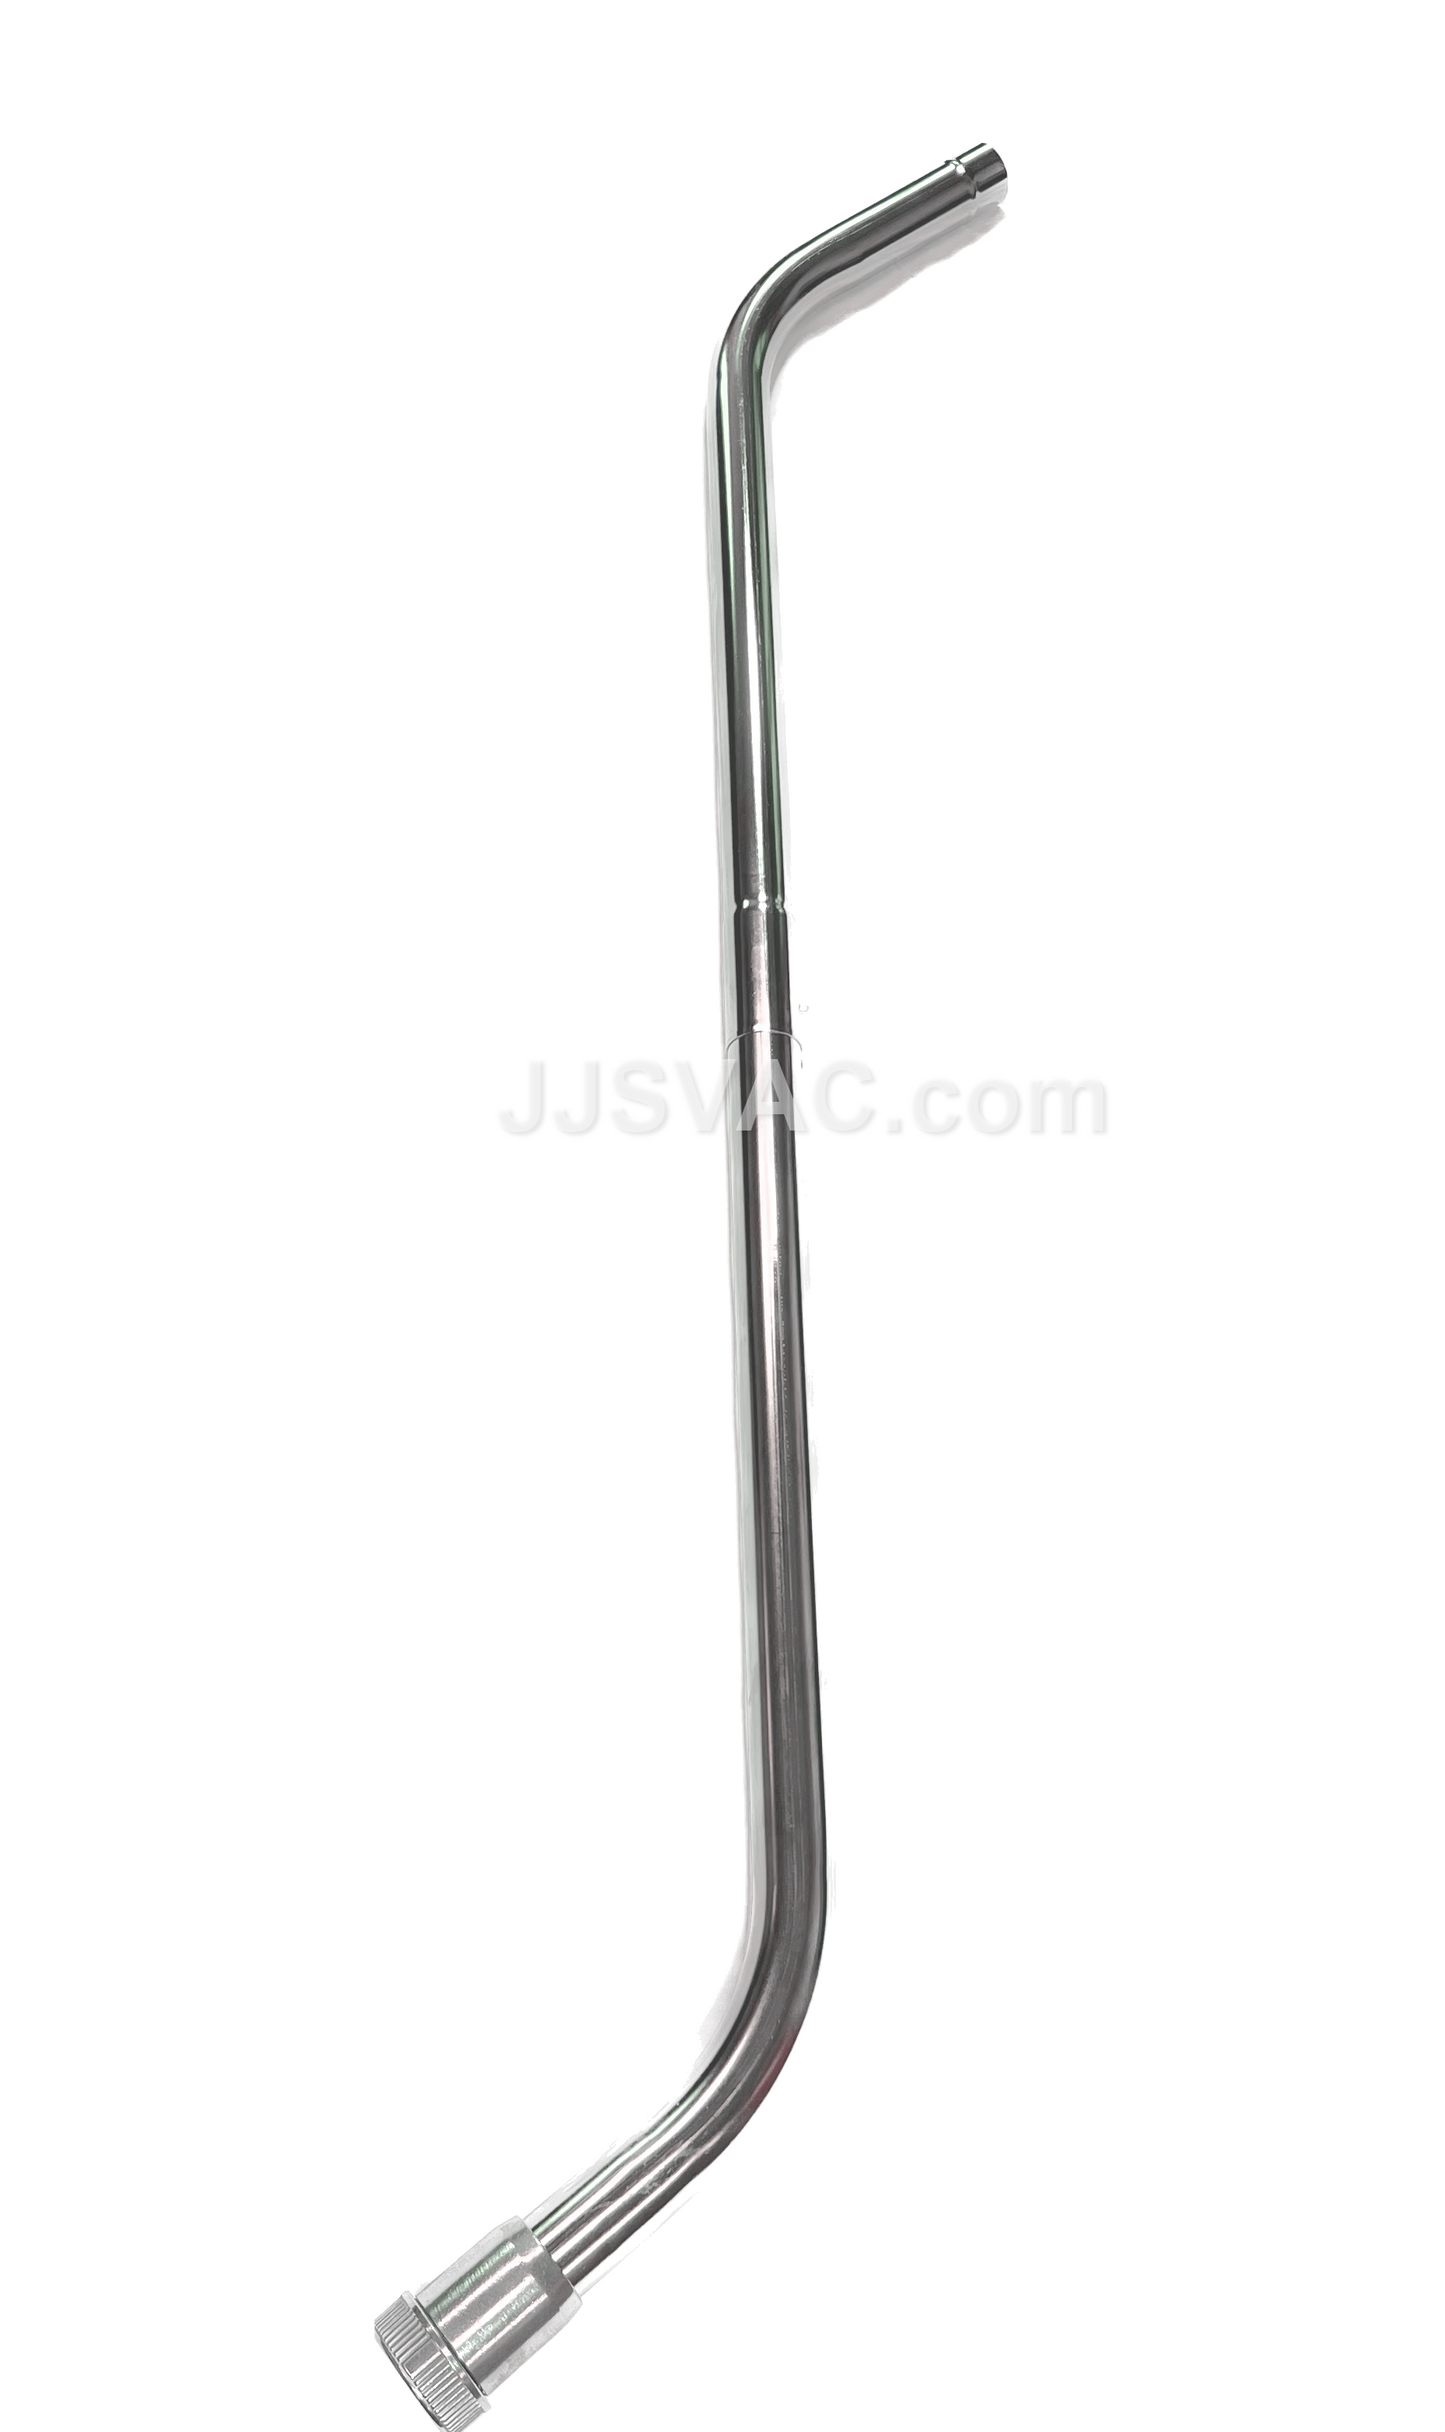 1-1/2" Two Piece Vacuum Cleaning Wand - 54" Chrome Steel Tube - Metal Coupling - Friction Fit - Flexaust / TUEC 22C5